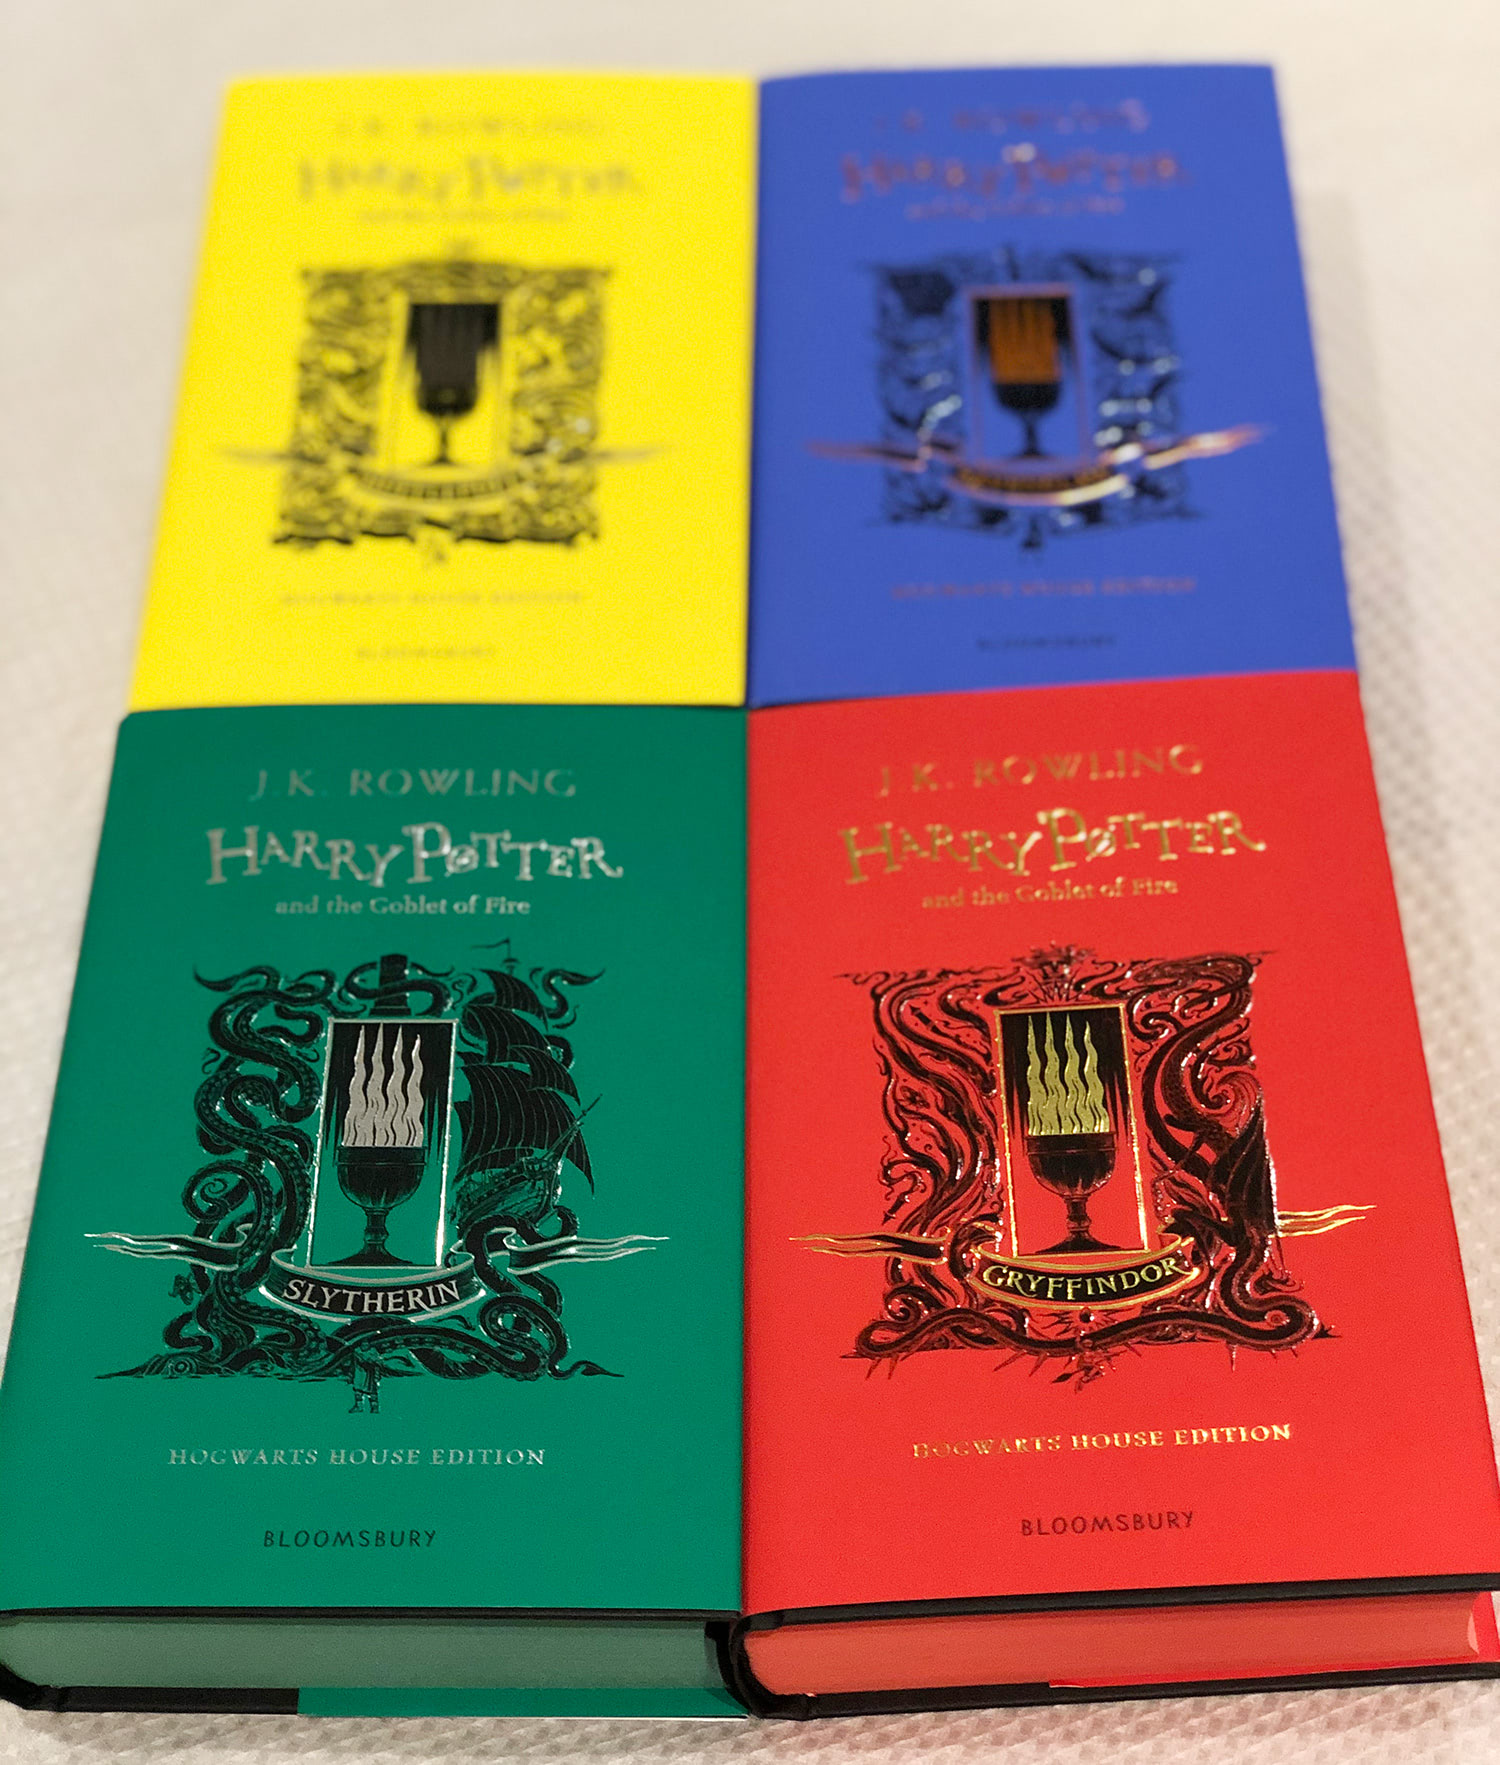 'Goblet of Fire' 20th anniversary house editions